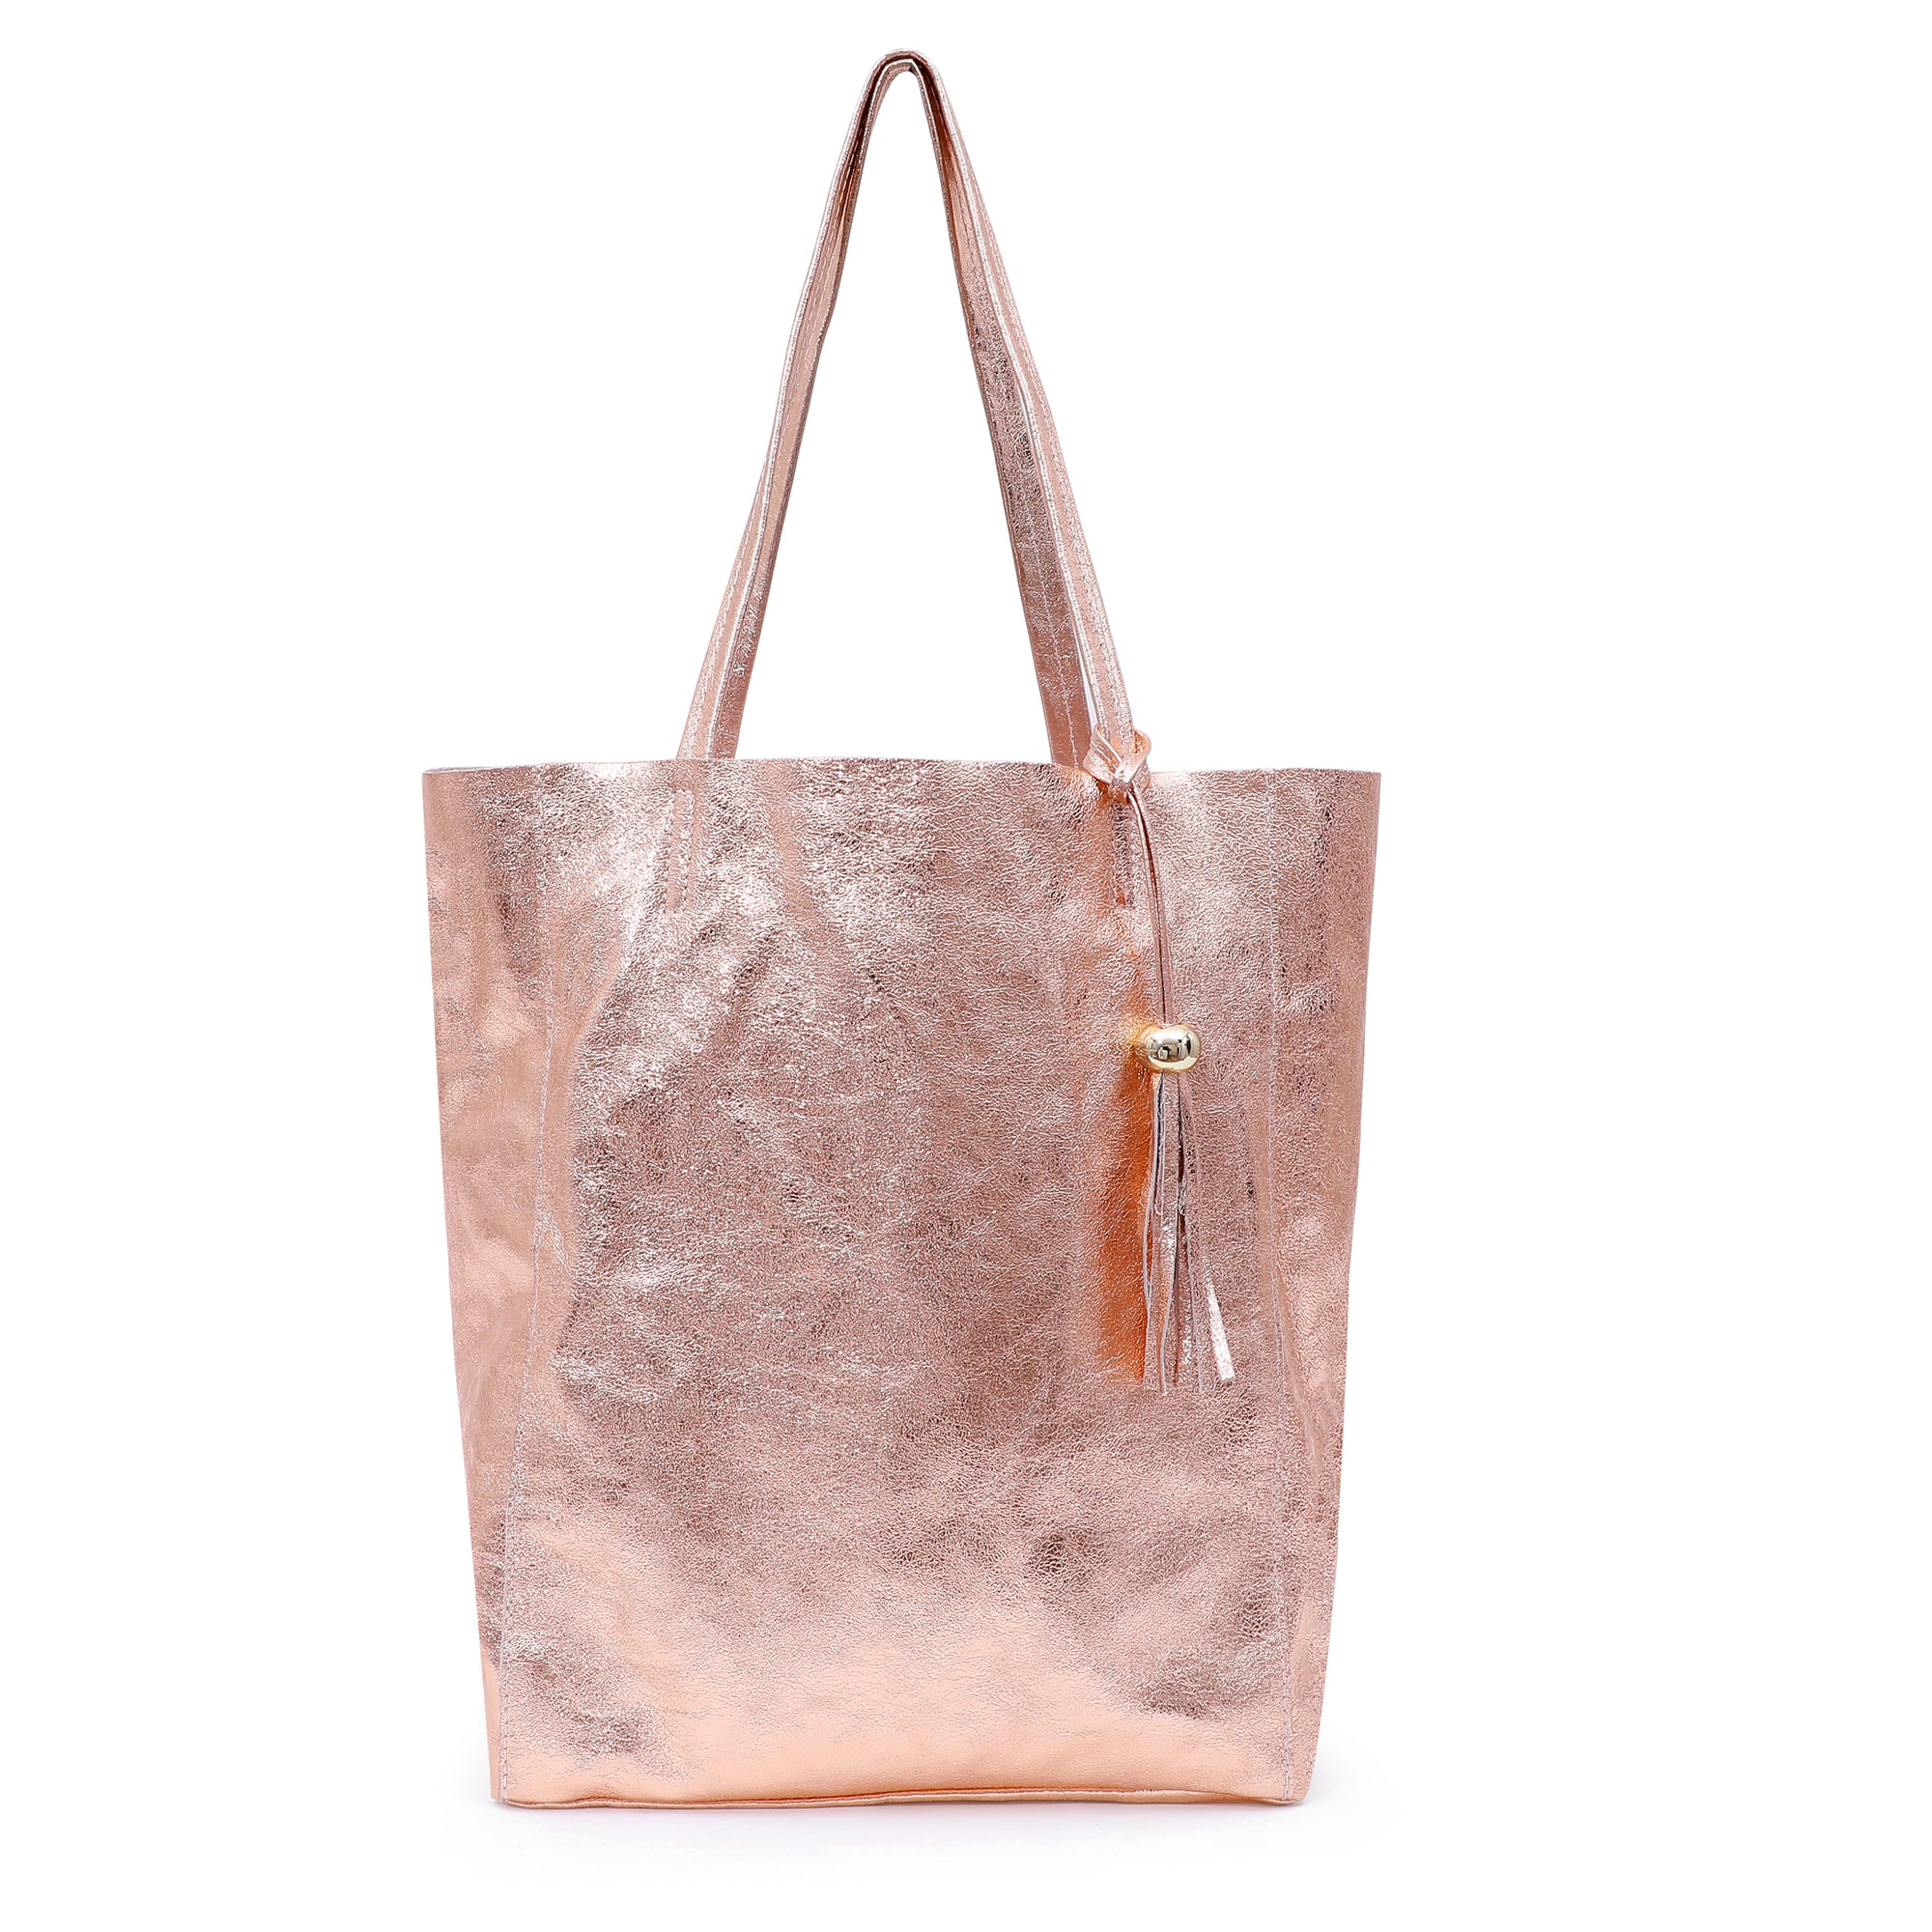 The 'Bessie' Italian Leather Shopper in Rose Gold